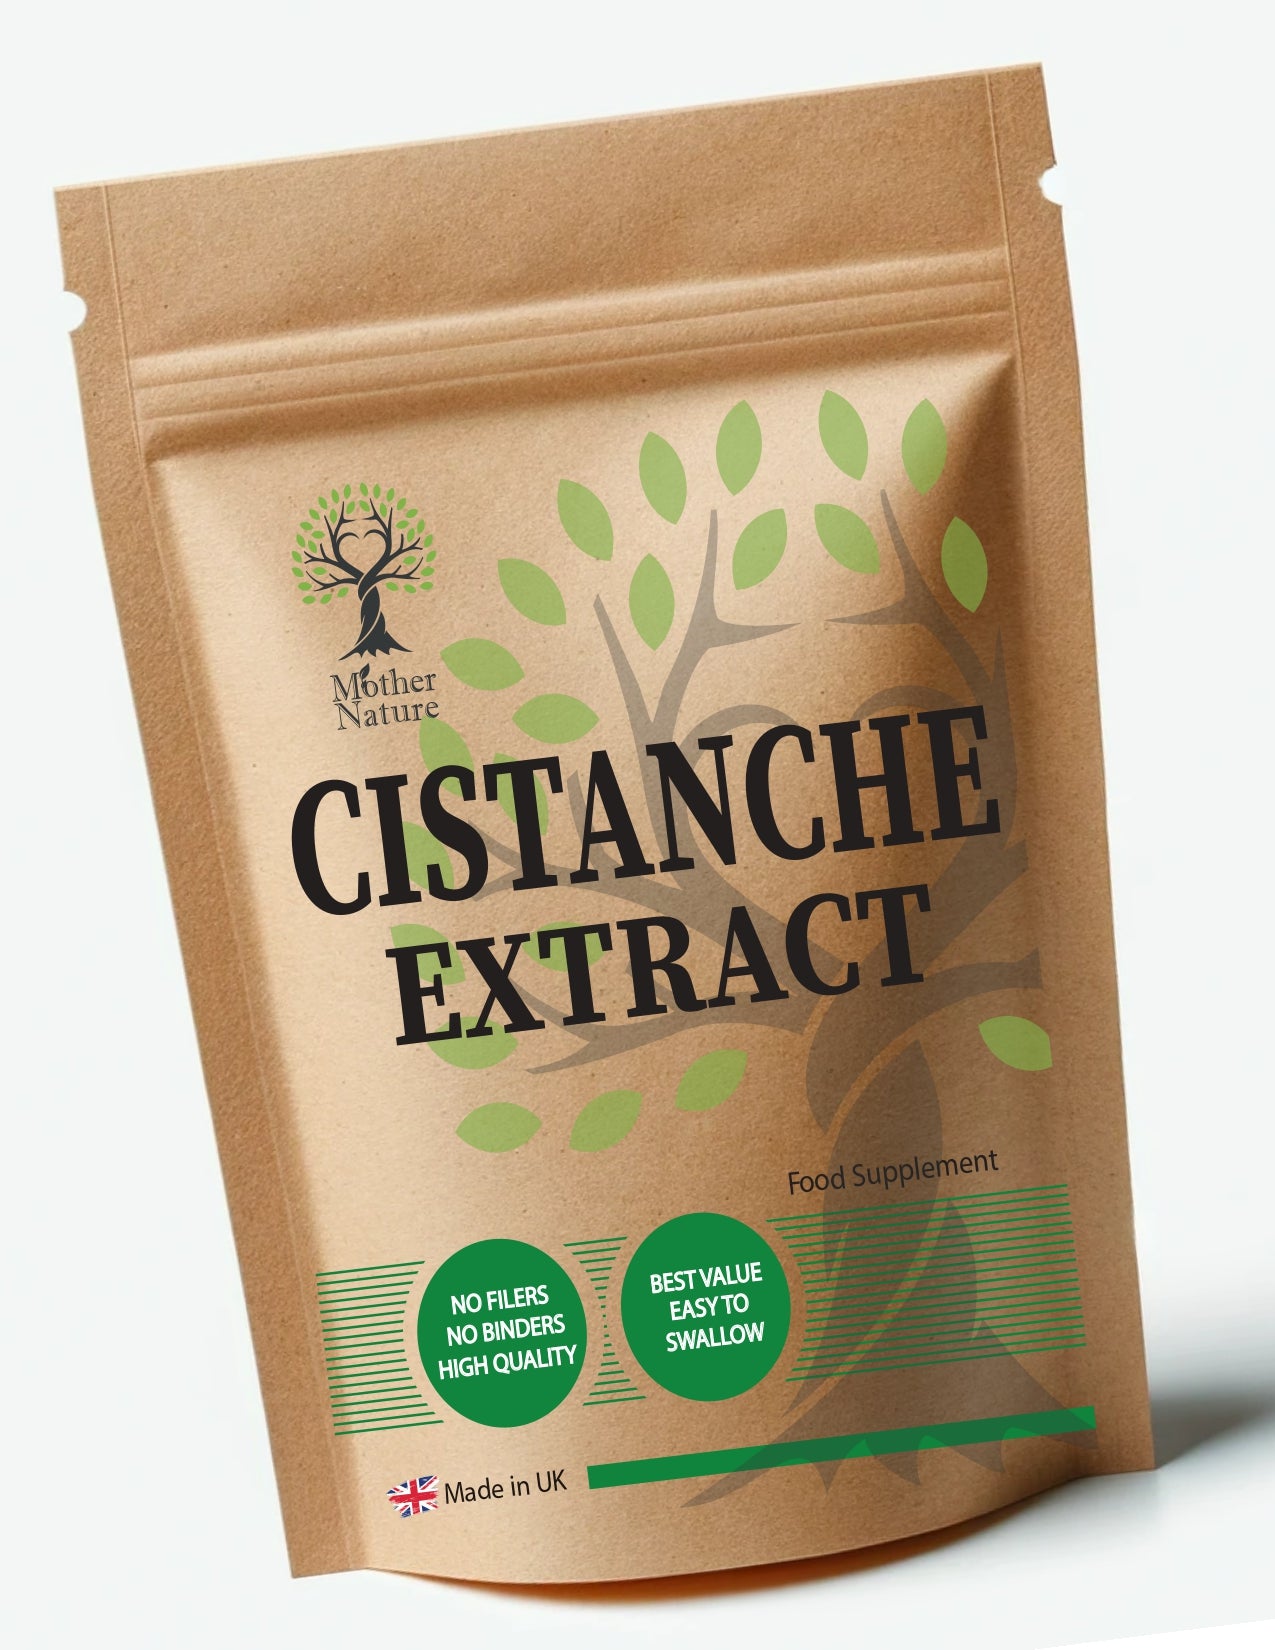 Cistanche Capsules 500mg Clean Natural Extract Cistanche Powder Vegan Supplements